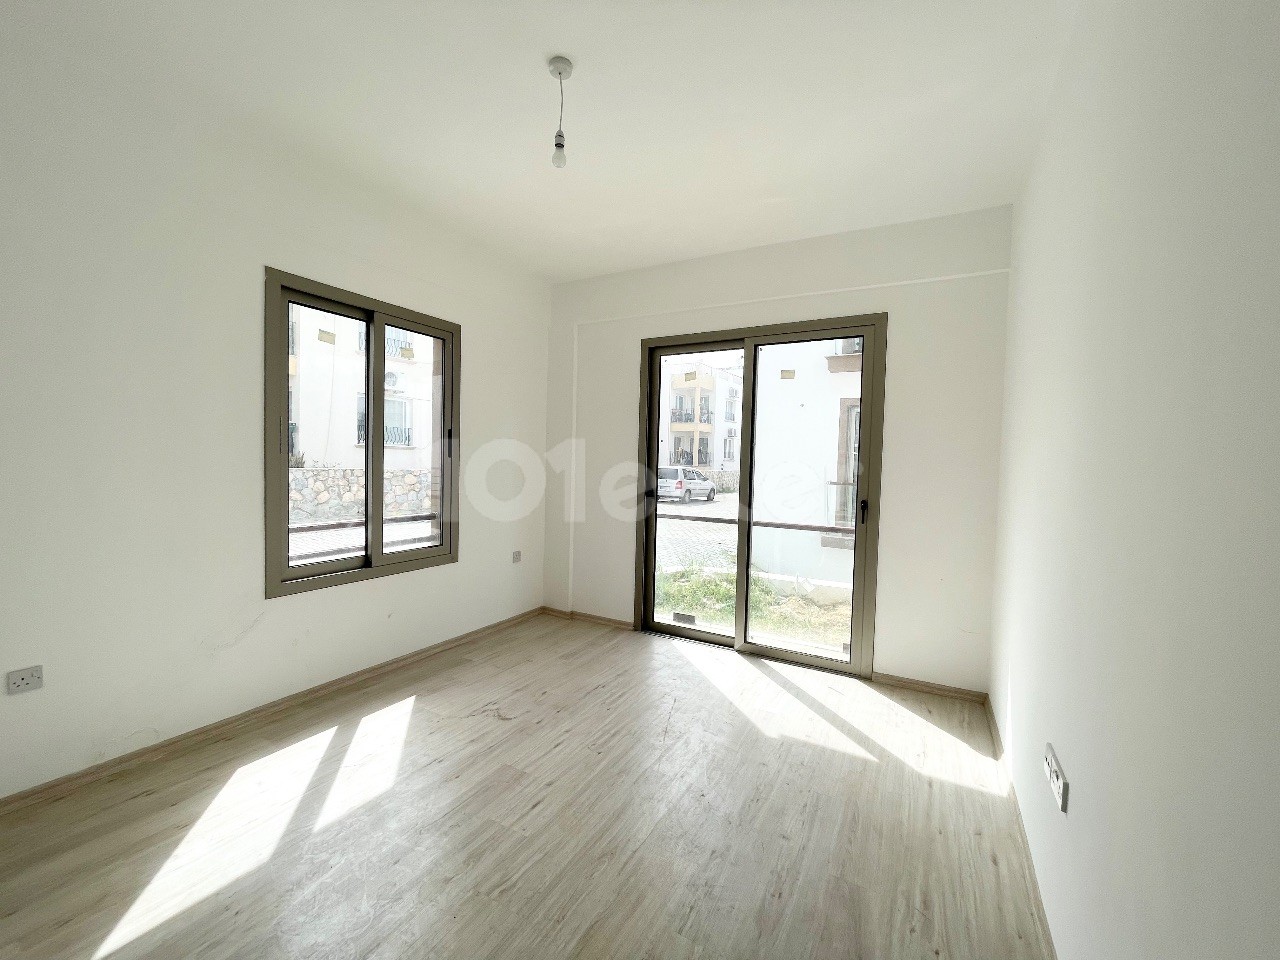 For sale brand new 2+1 large apartment